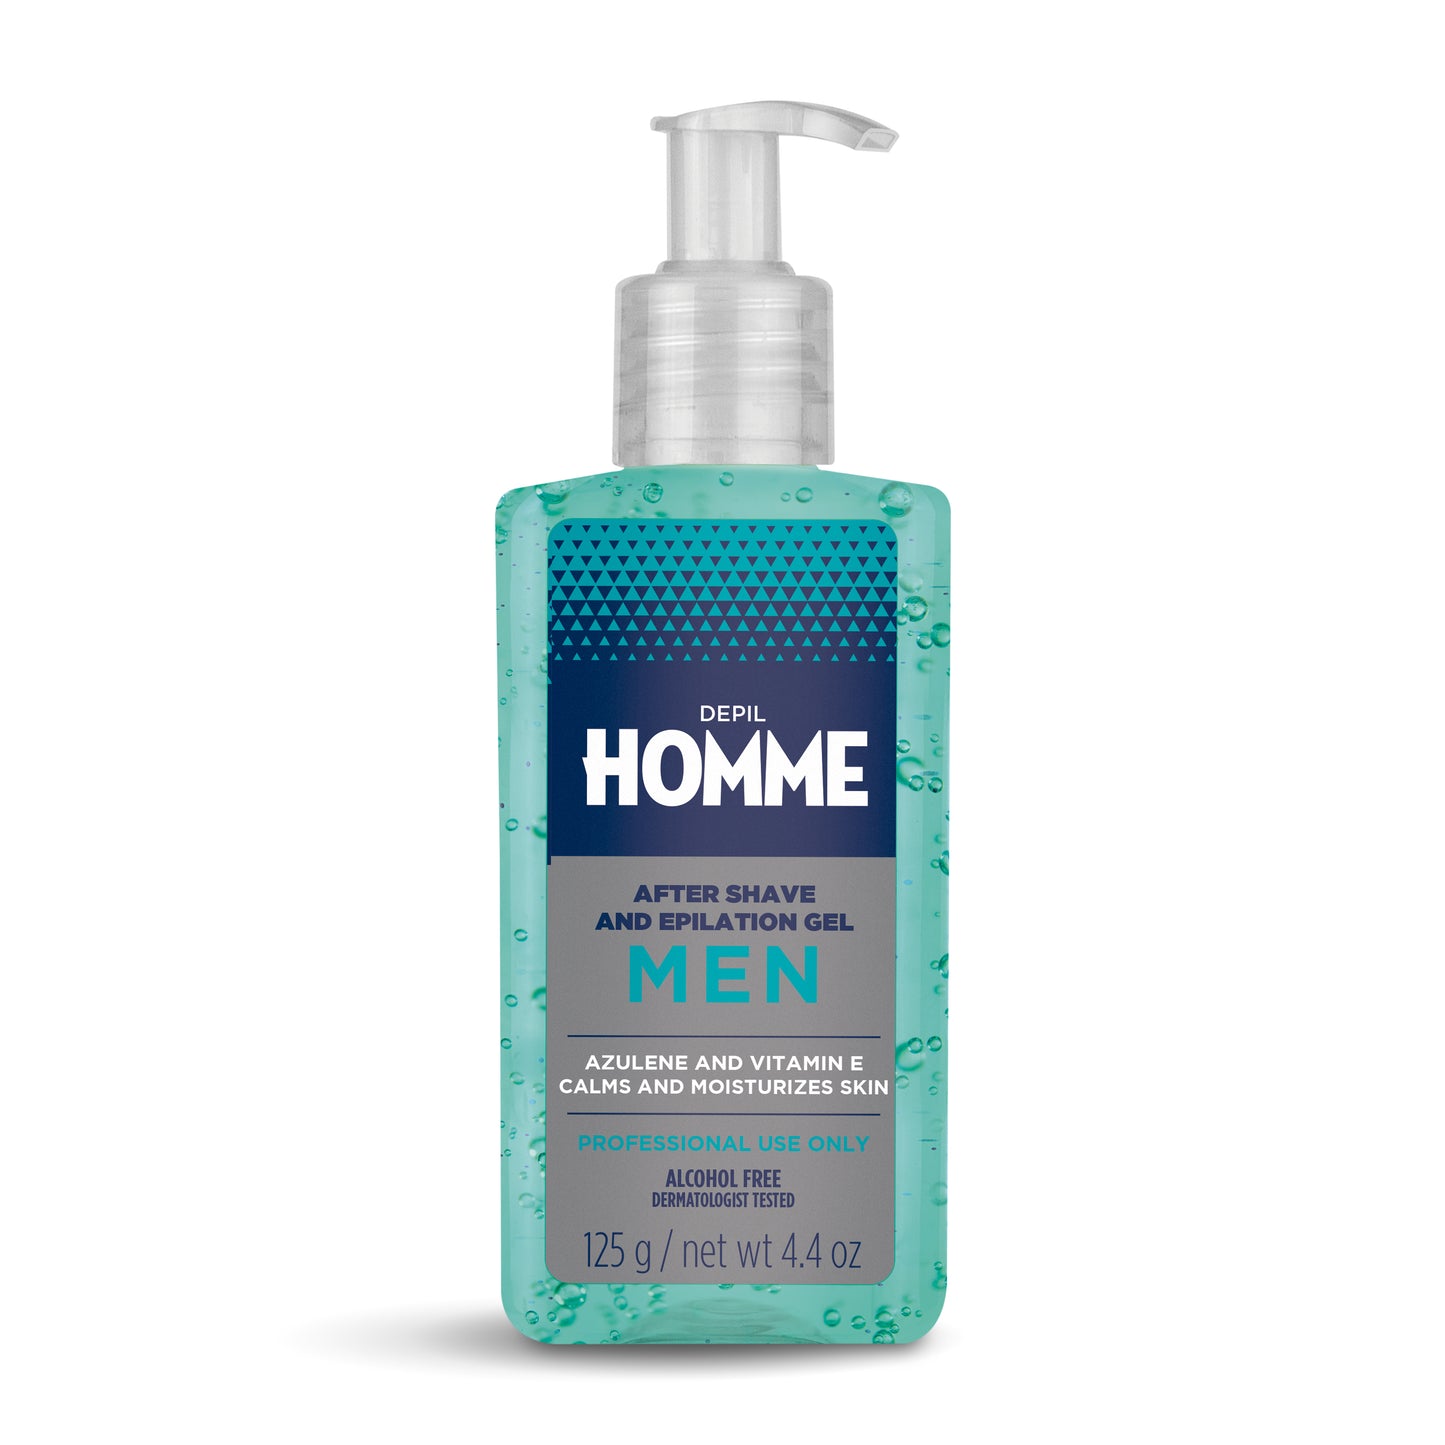 Depil Homme by Depil Bella After Shave and Waxing Gel 125g - Depilcompany